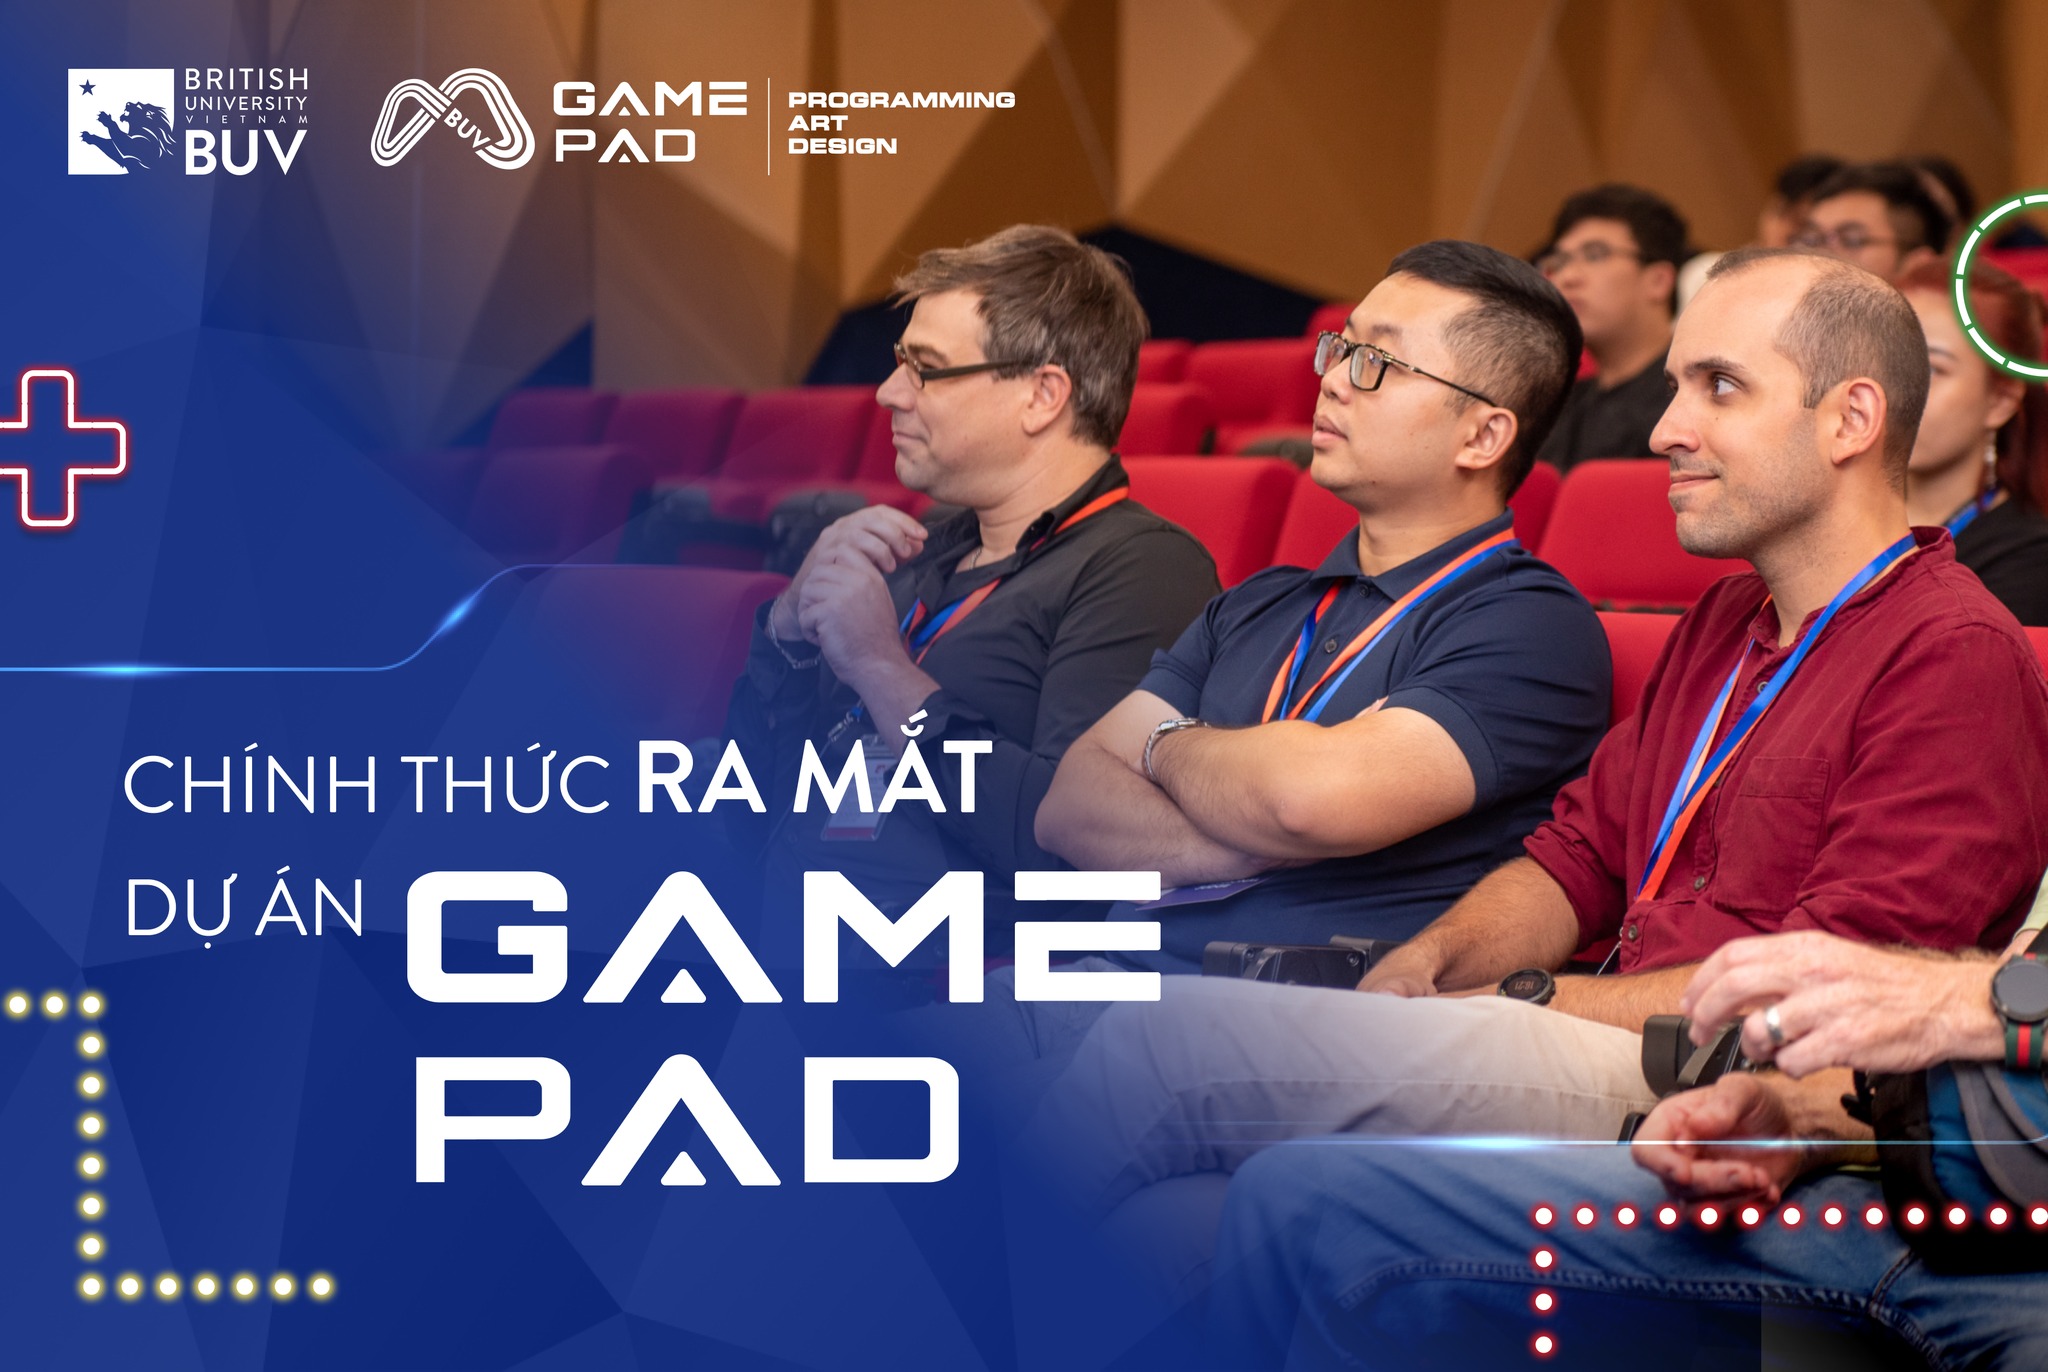 BUV officially launches GamePad, aiming to nurture talents in the Vietnamese game industry